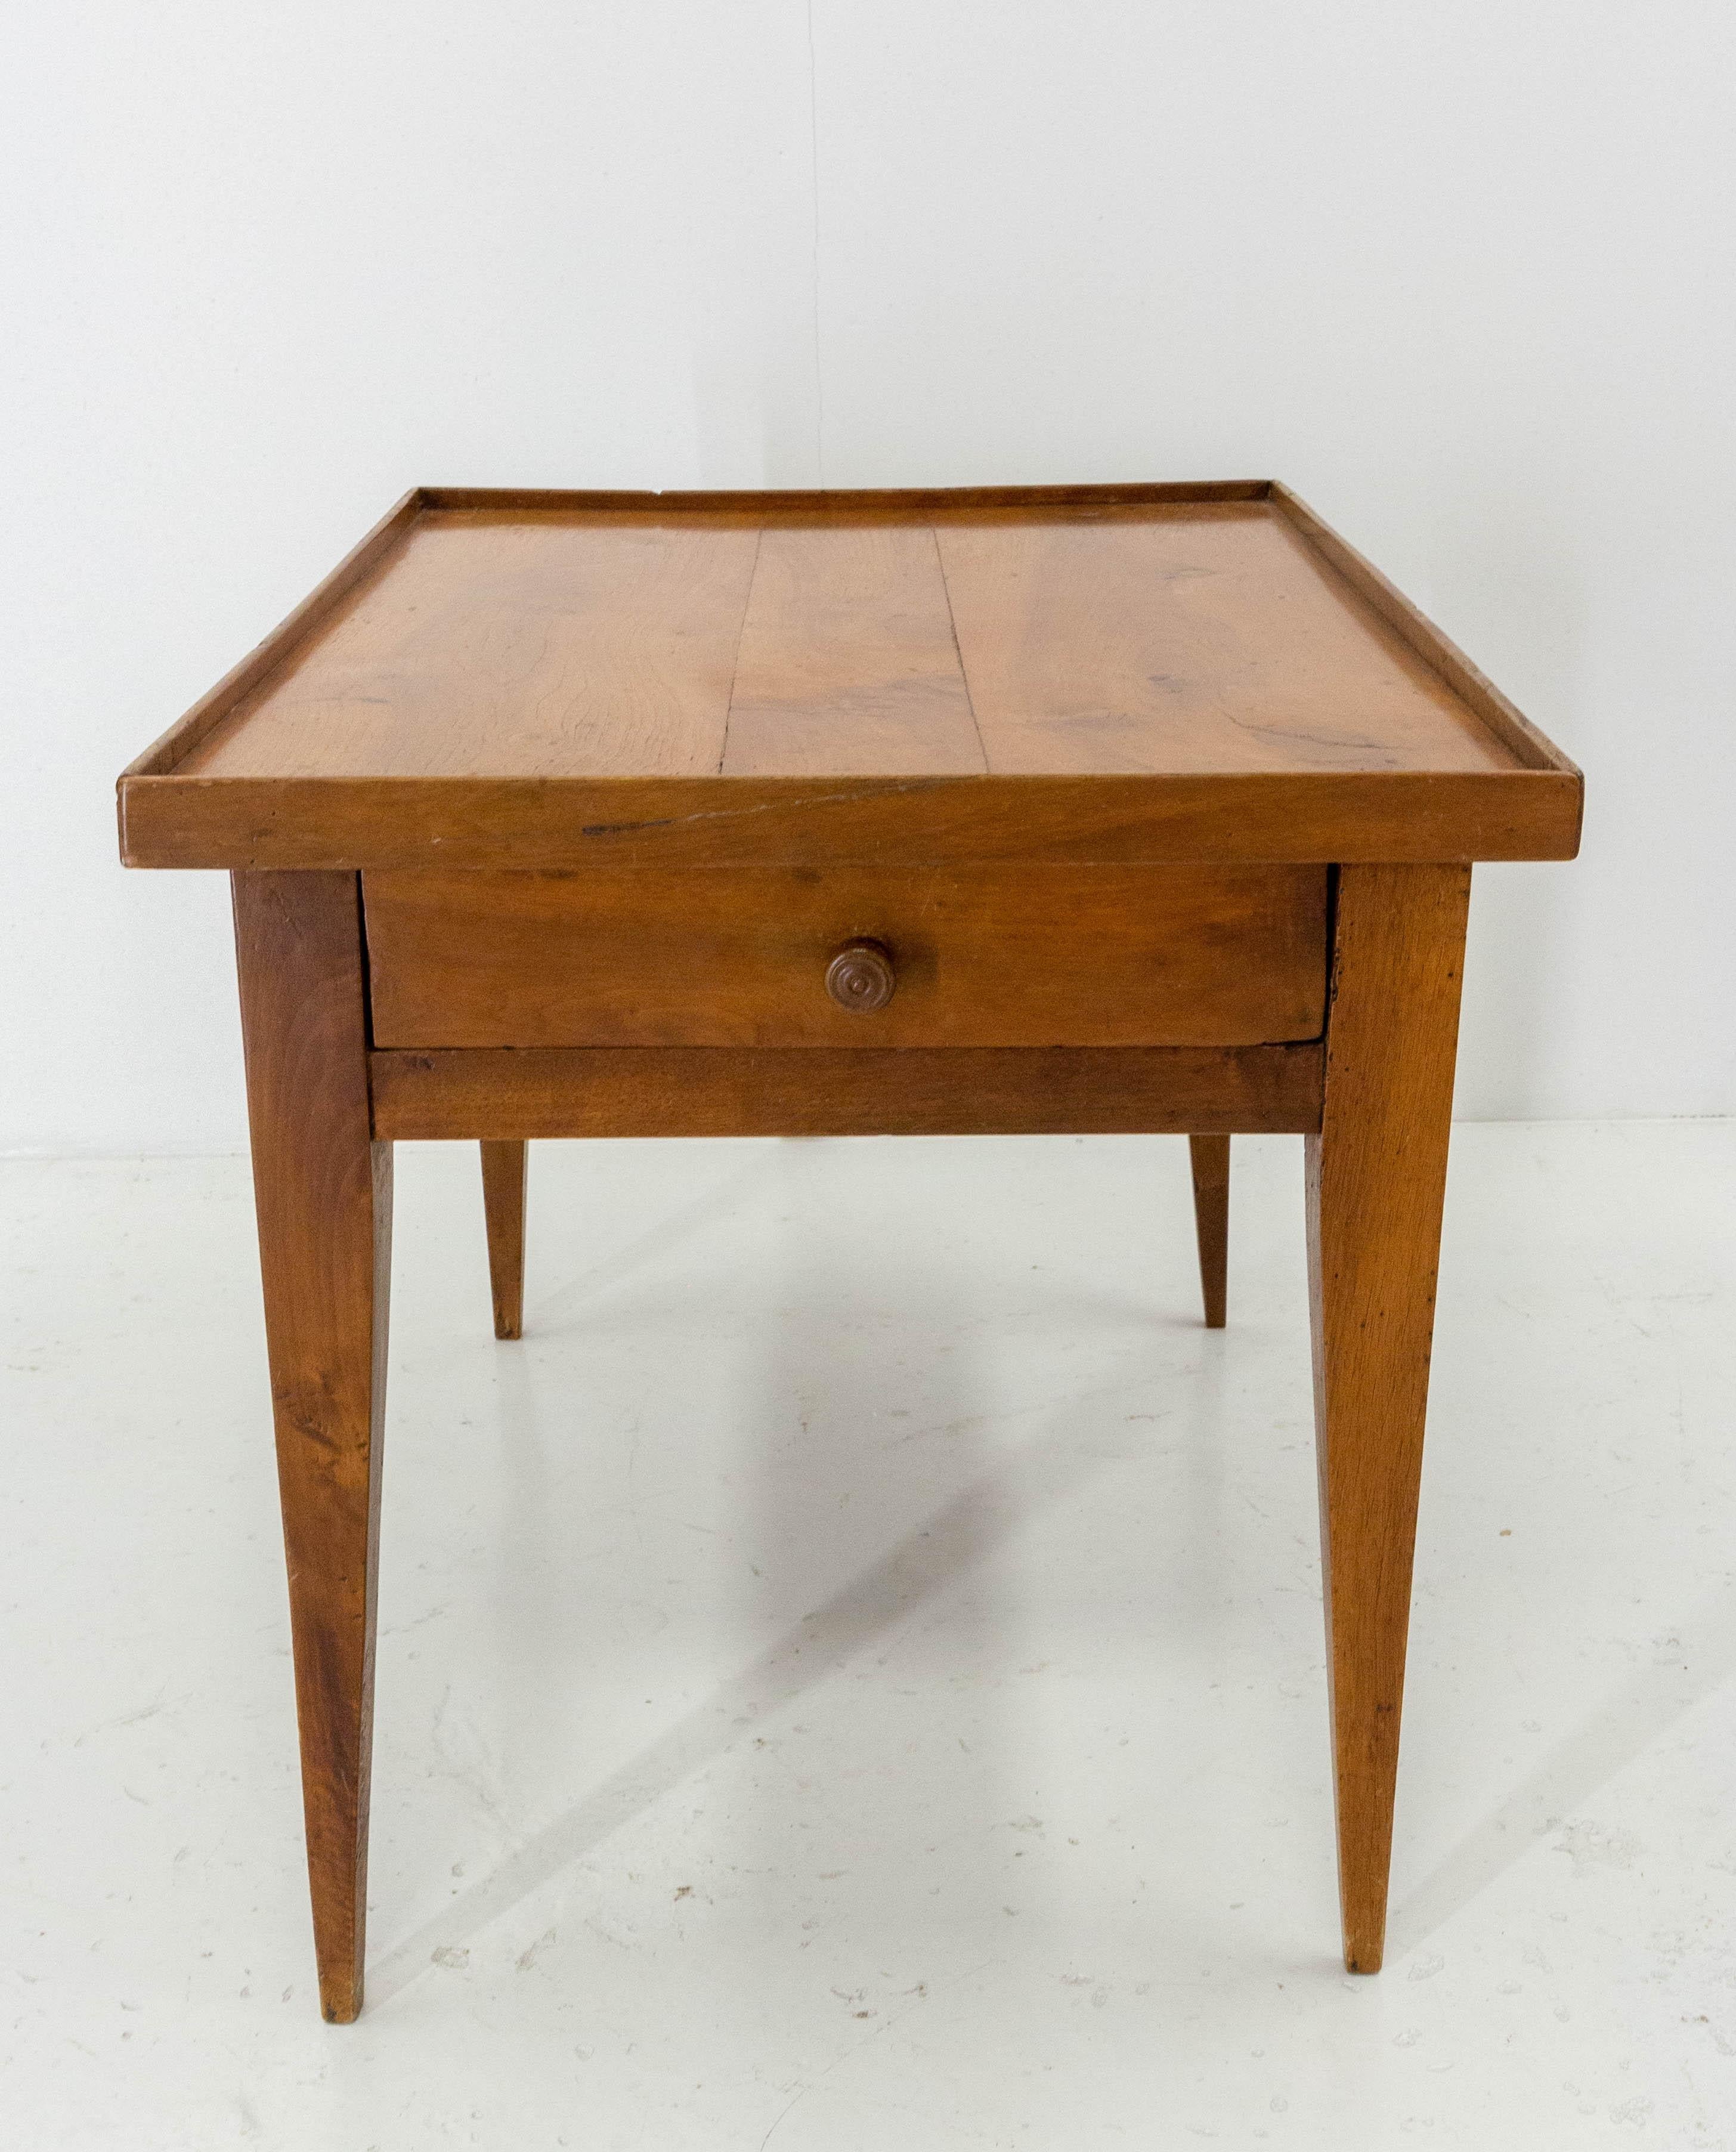 French Cherrywood Coffee Table with Drawers Country Style, Late 19th Century For Sale 1